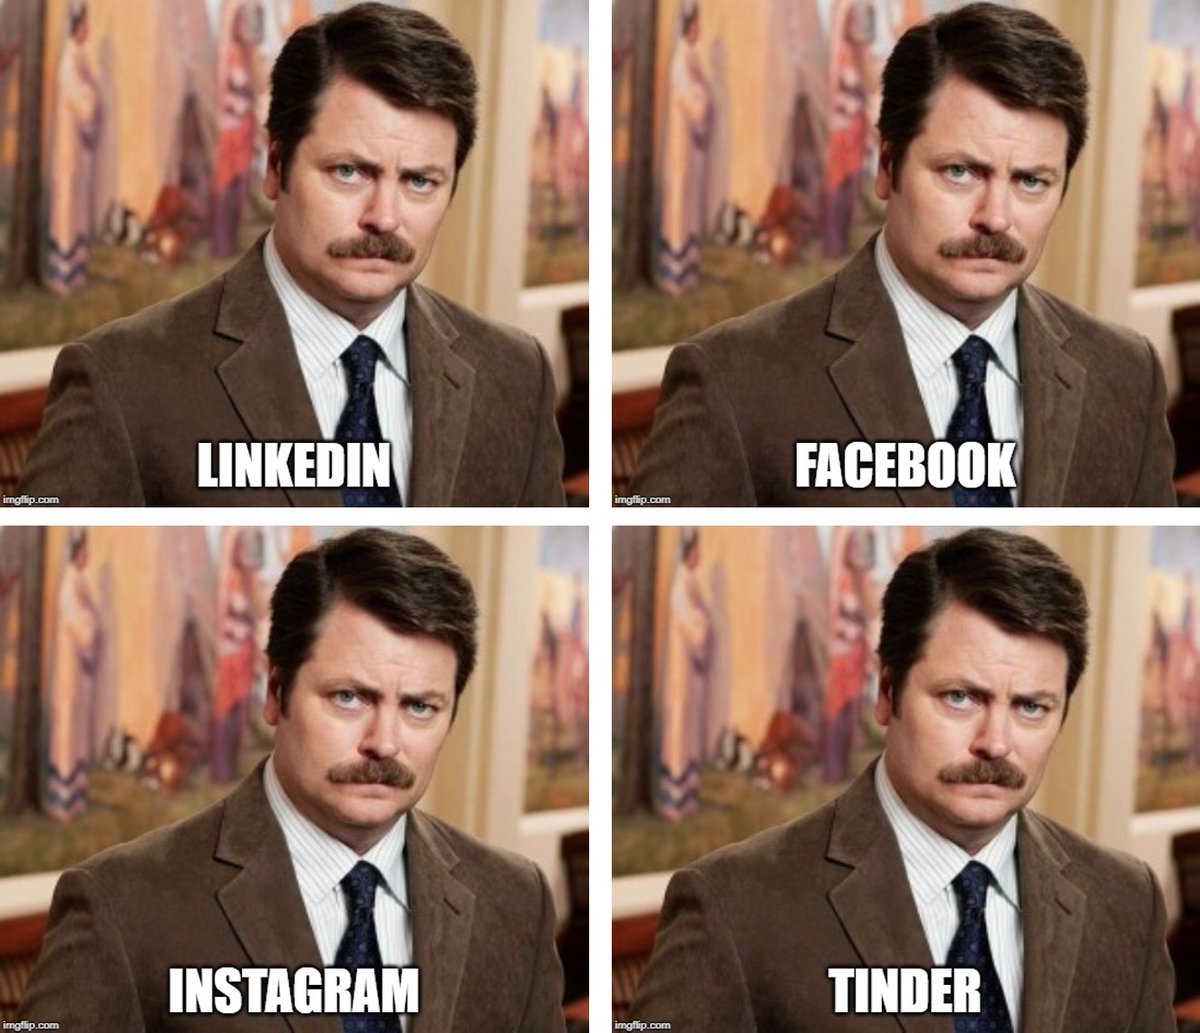 Dr John Tregoning The Linkedin Facebook Instagram Tinder Meme That We Have All Been Waiting For Or At Least I Had Been Waiting For So I Made It Myself Nick Offerman